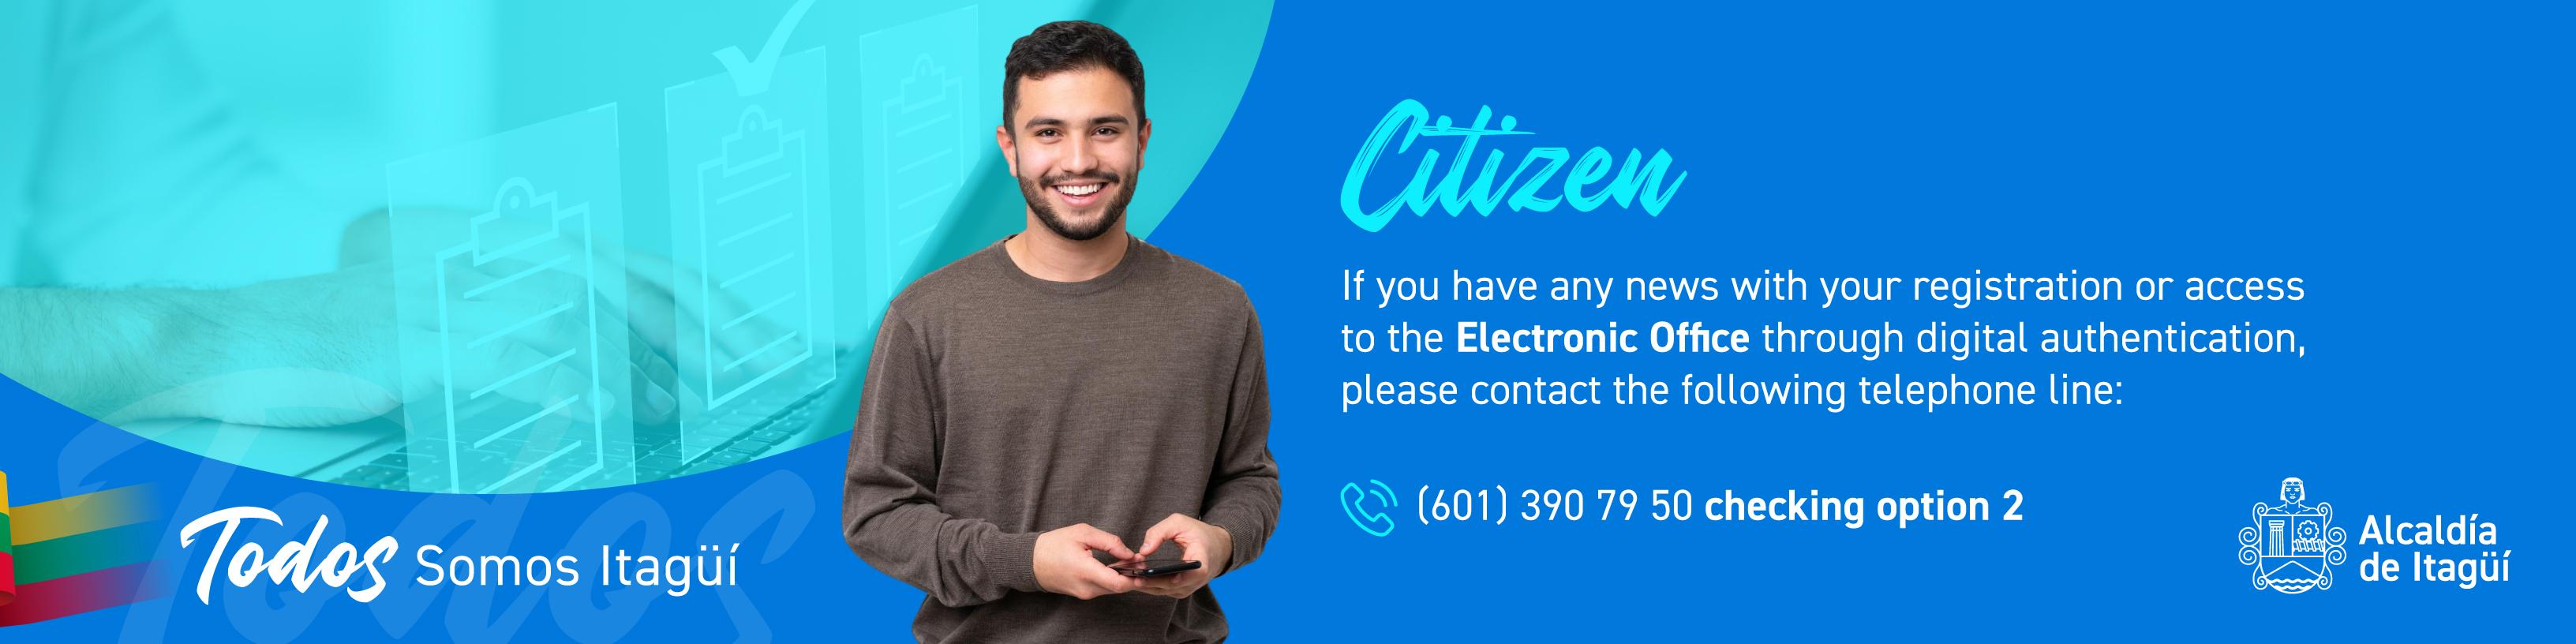 Citizen
If you have any news with your registration or access to the Electronic Office through digital authentication, please contact the following telephone line:
(601) 390 79 50 by checking option 2